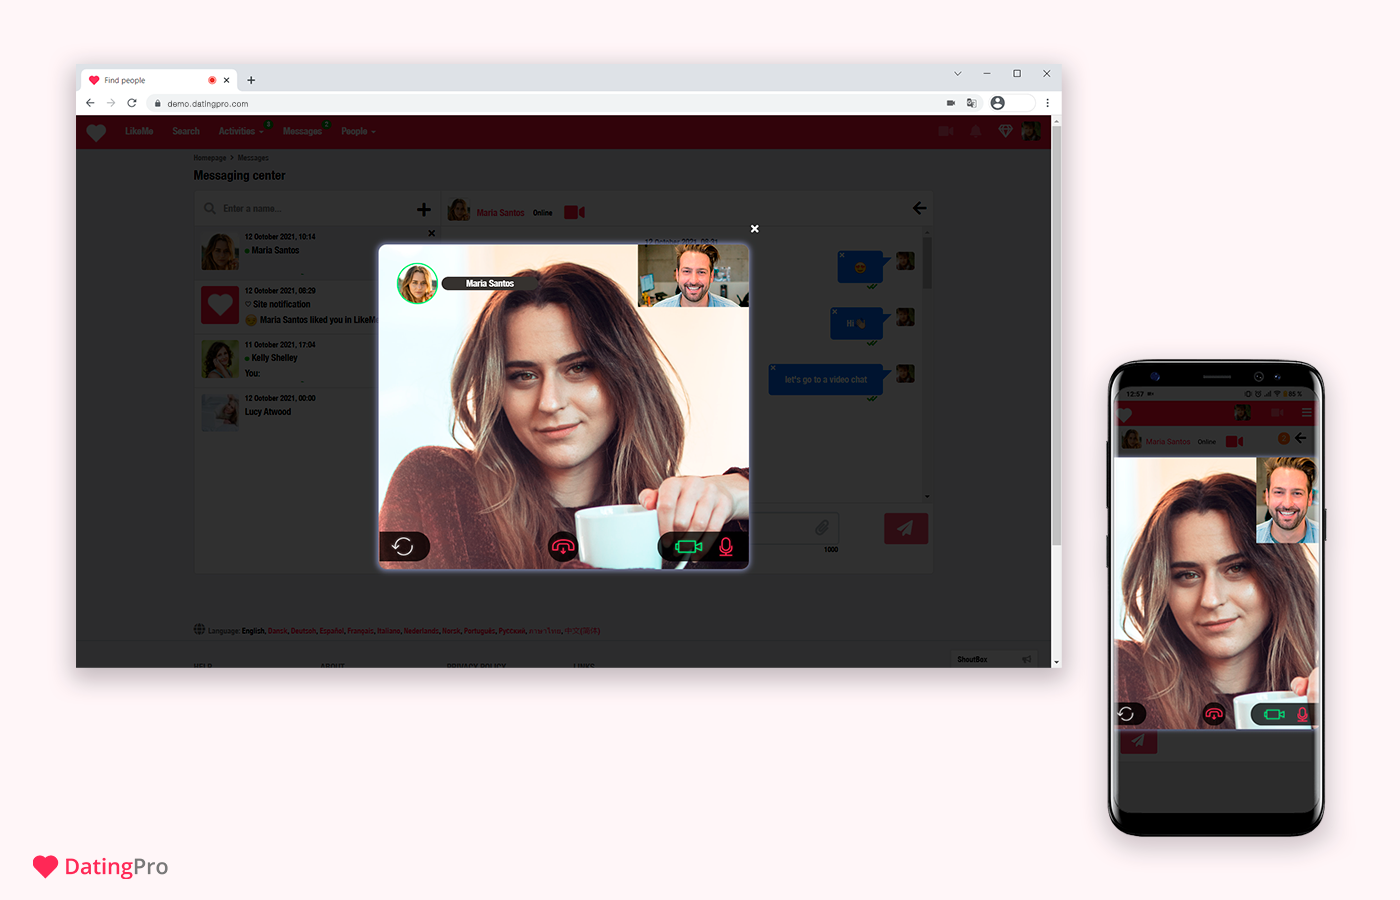 Pay-per-minute video chat - Set up video chat with Twilio within 30 minutes